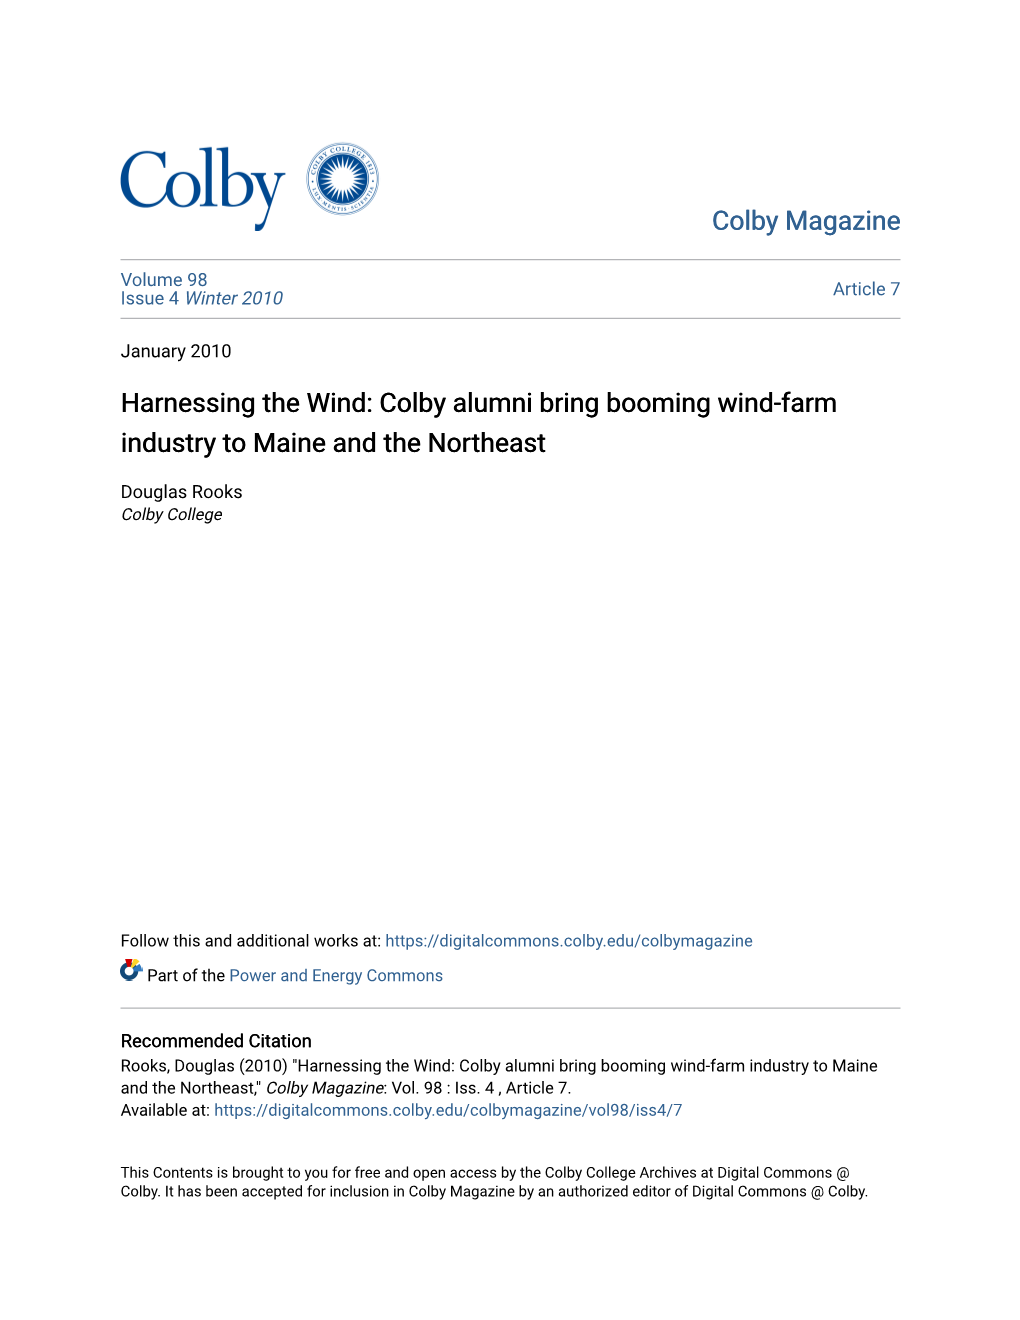 Colby Alumni Bring Booming Wind-Farm Industry to Maine and the Northeast